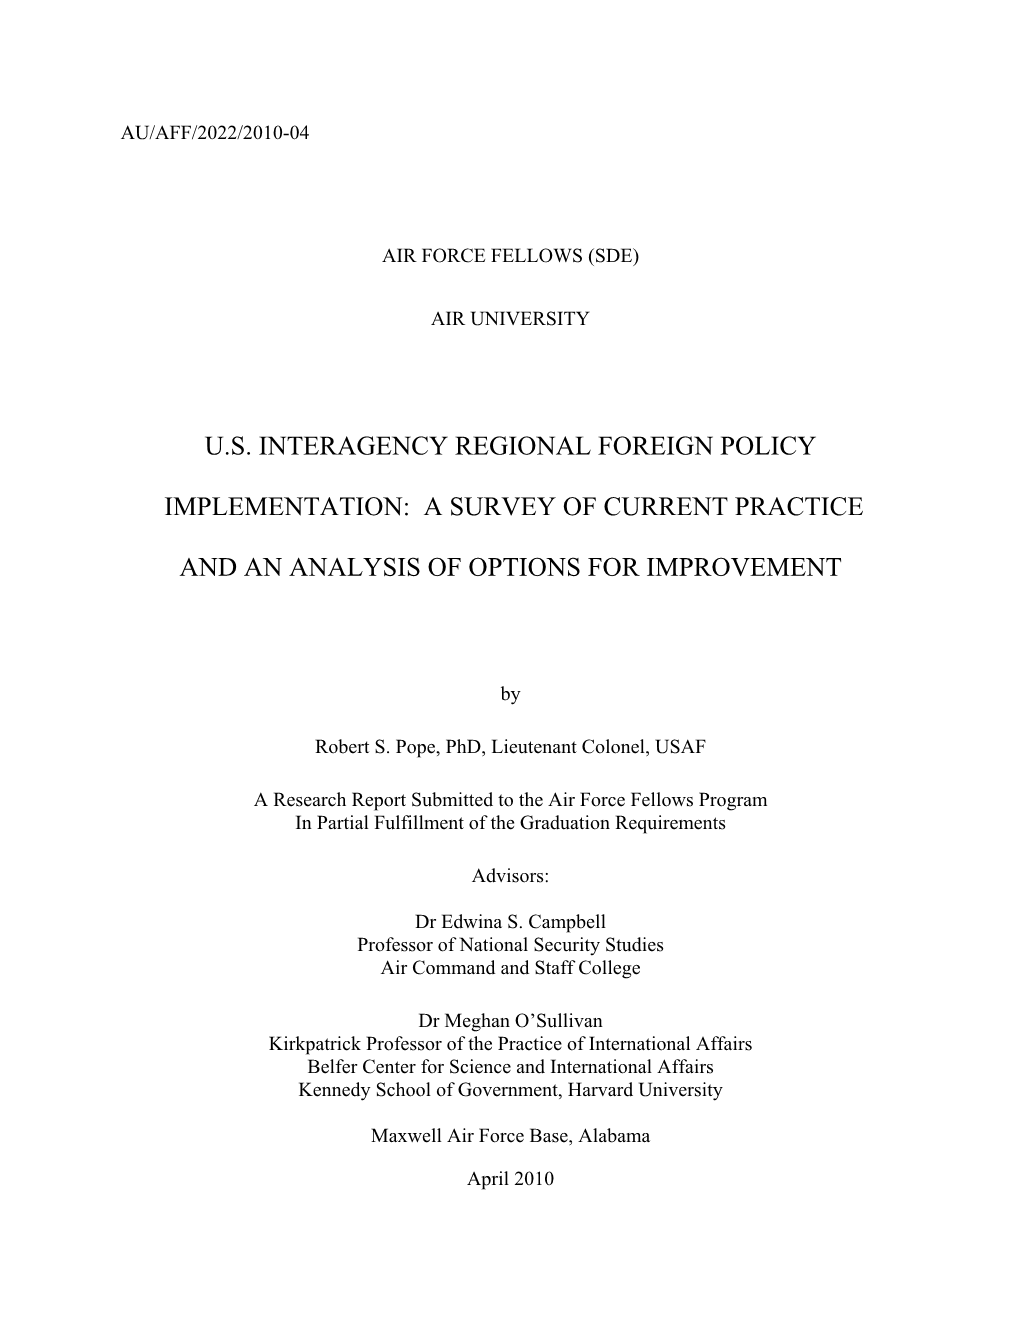 U.S. Interagency Regional Foreign Policy Implementation: a Survey of Current Practice and An